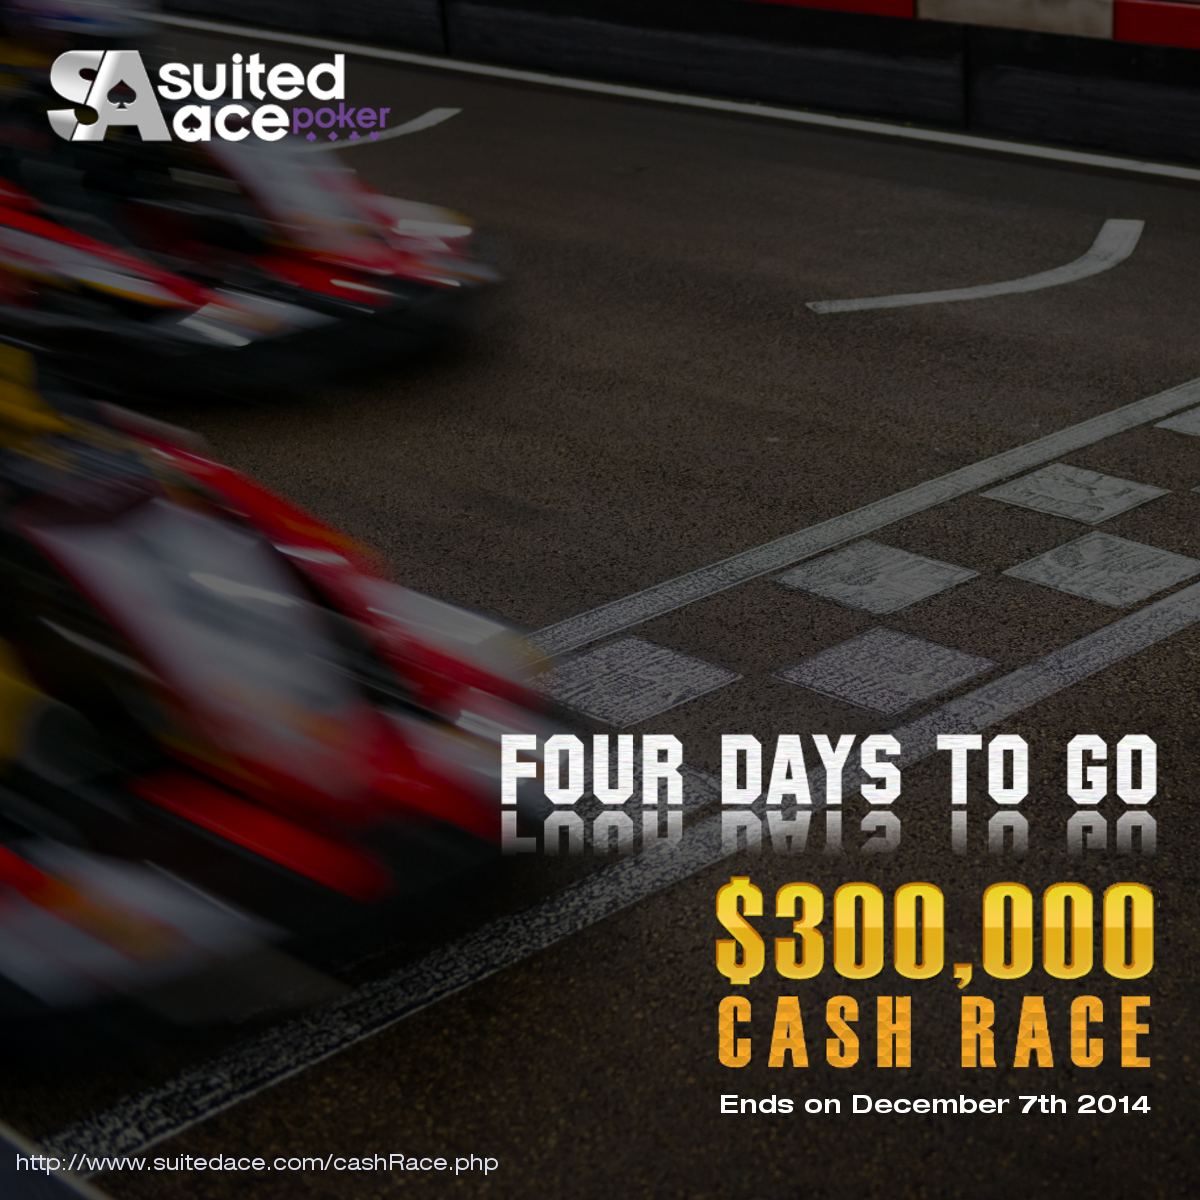 Four days to go $300,000 Cash Race ends on December 7th 2014